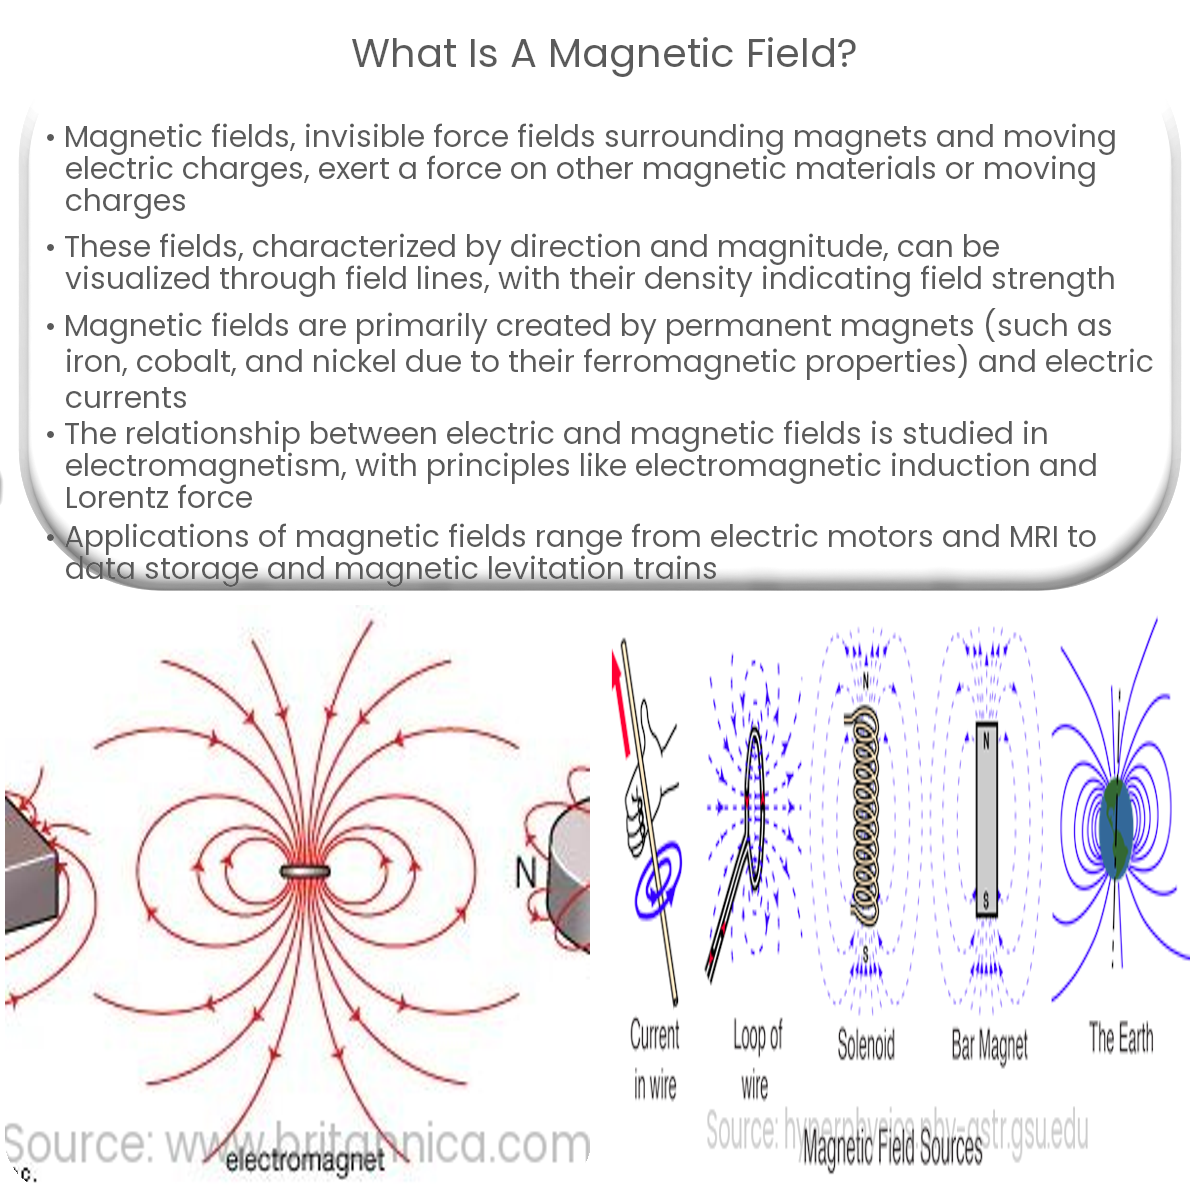 What is a magnetic field?